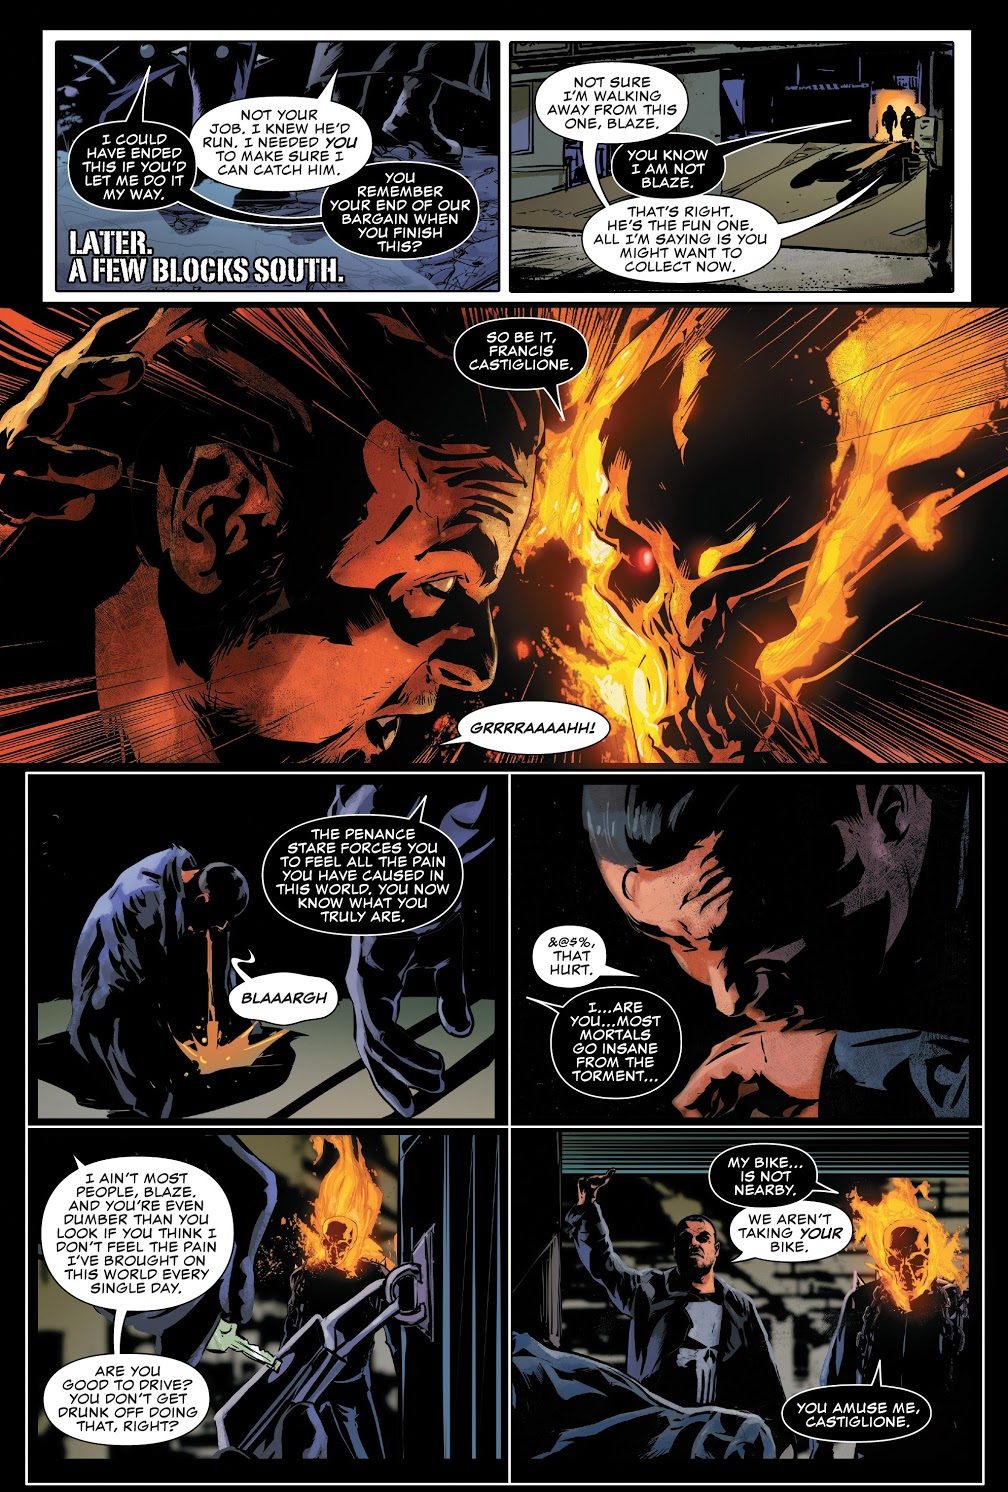 The Punisher Survives Ghost Rider's Penance Stare